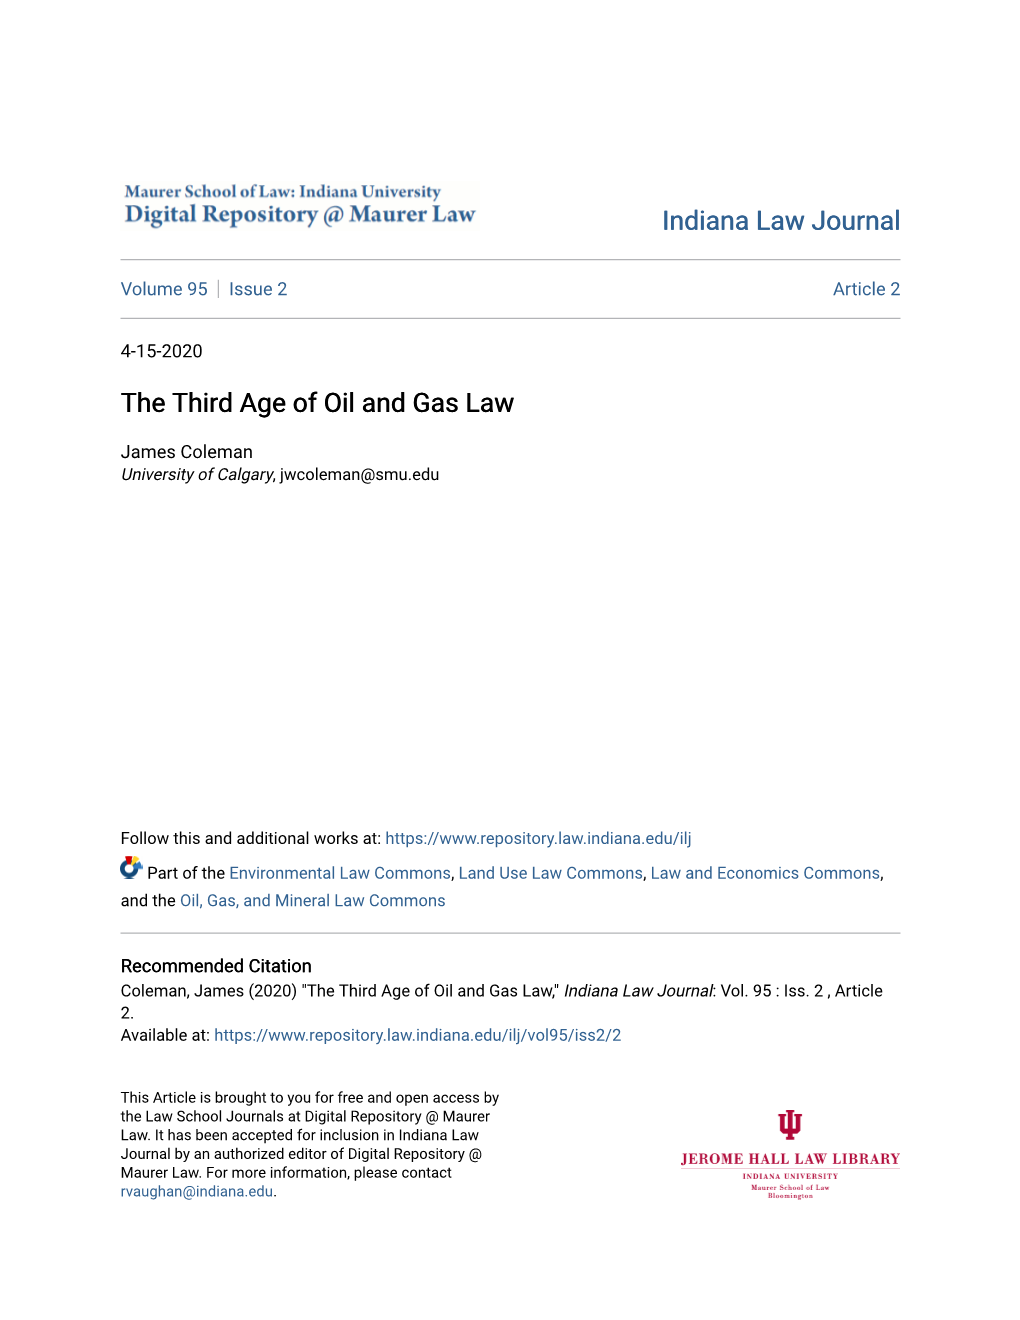 The Third Age of Oil and Gas Law